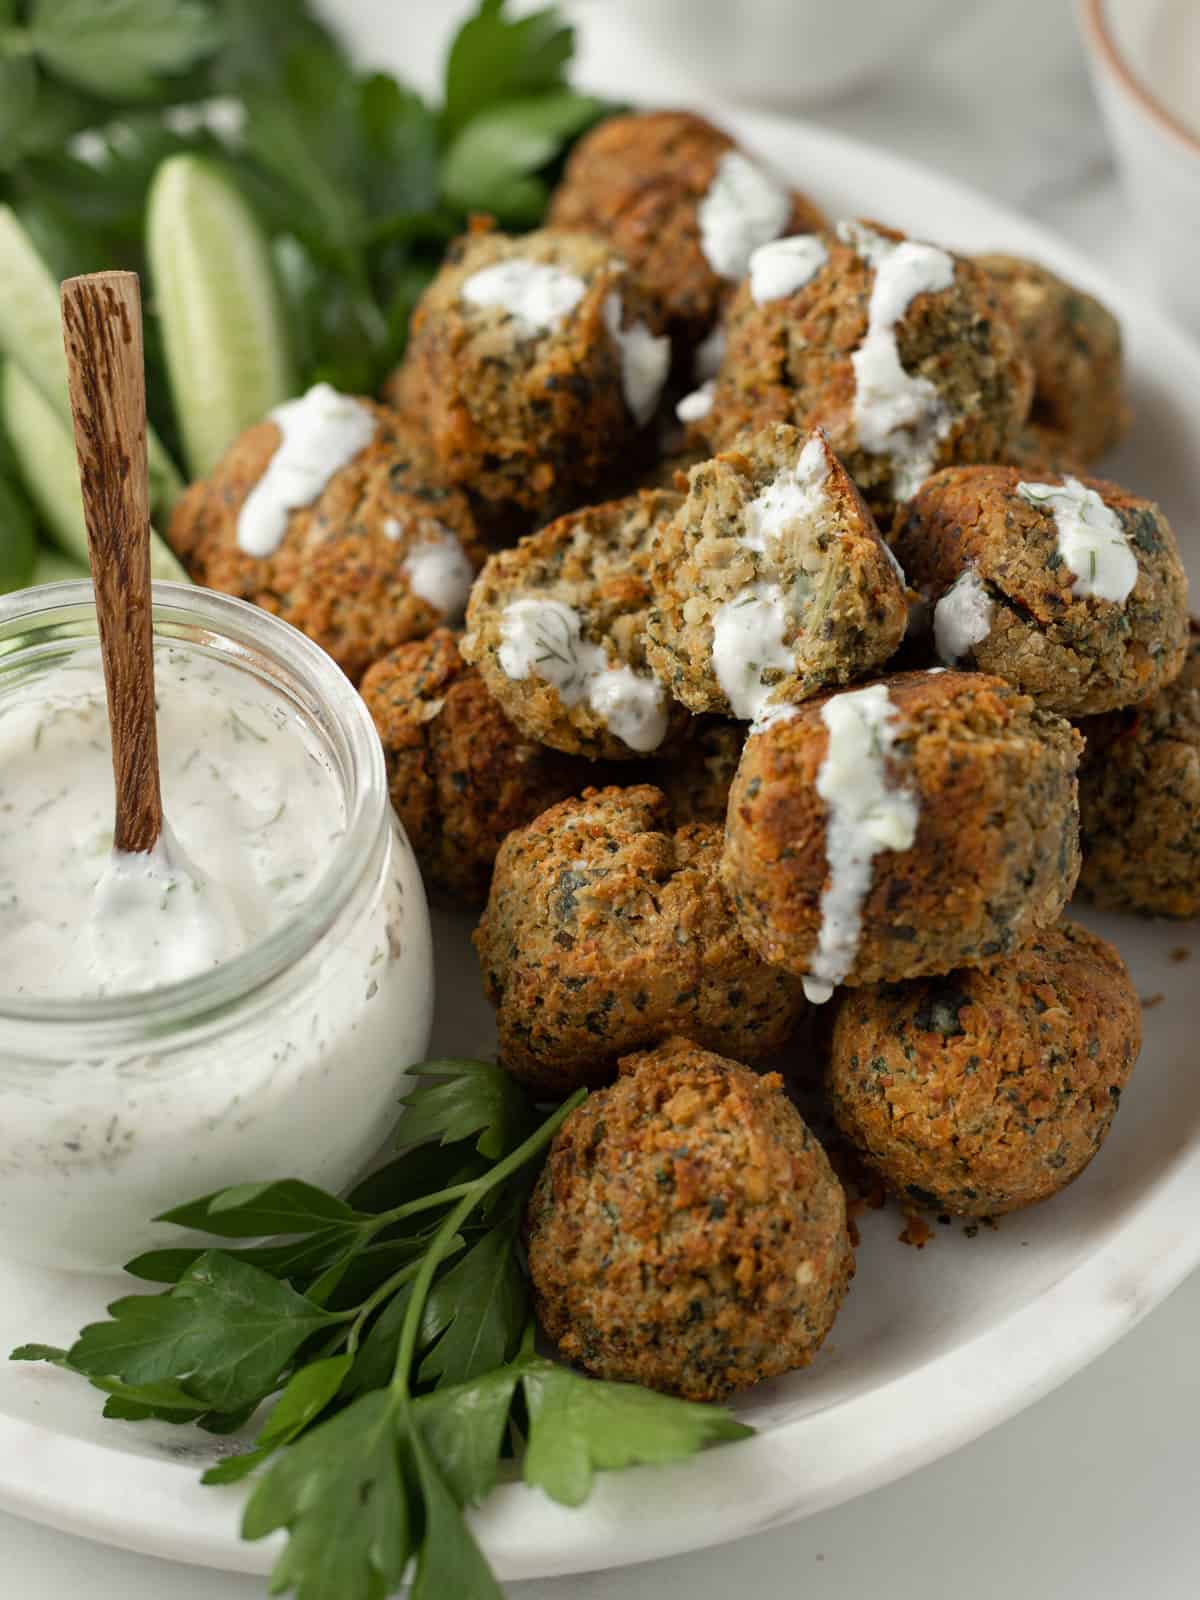 Falafel and cucumber slices on a platter with tzatziki sauce.